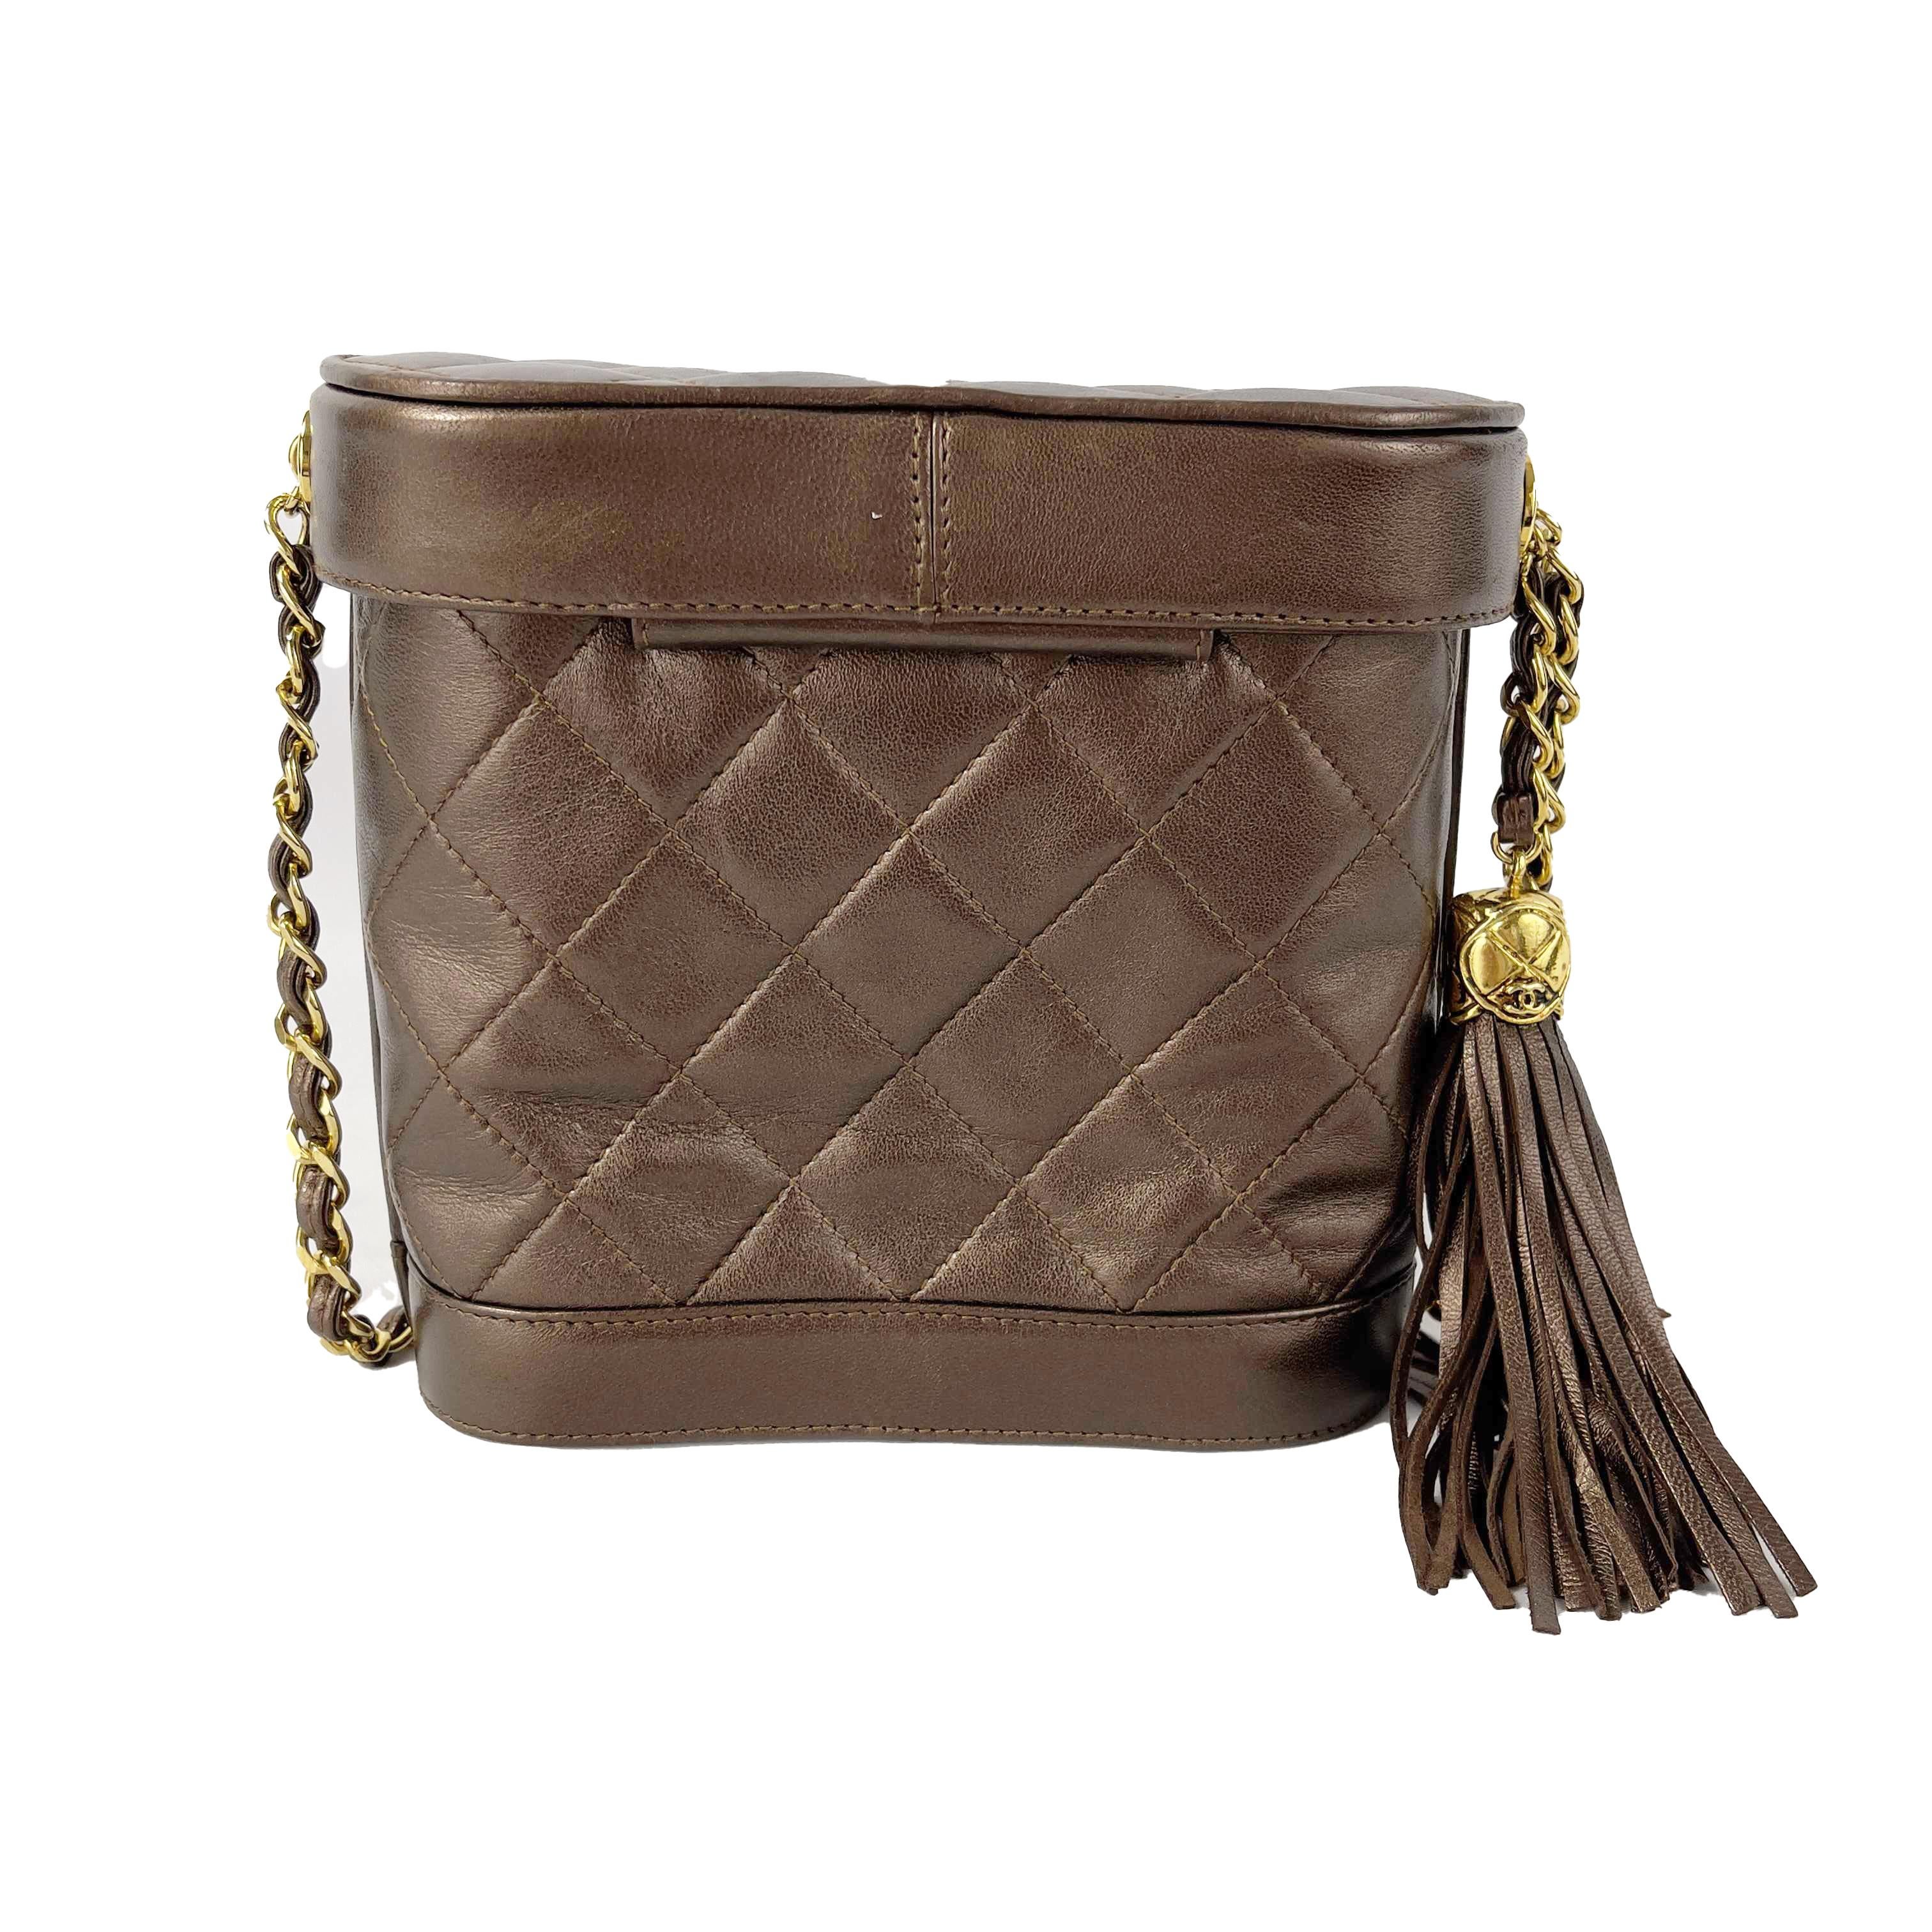 CHANEL - Vintage Tassel Box Quilted - Metallic Bronze / Gold-tone Crossbody

Description

This bag is crafted from bronze diamond quilted leather, features woven-in leather chain strap, round structured silhouette and gold-tone hardware.
CC logo